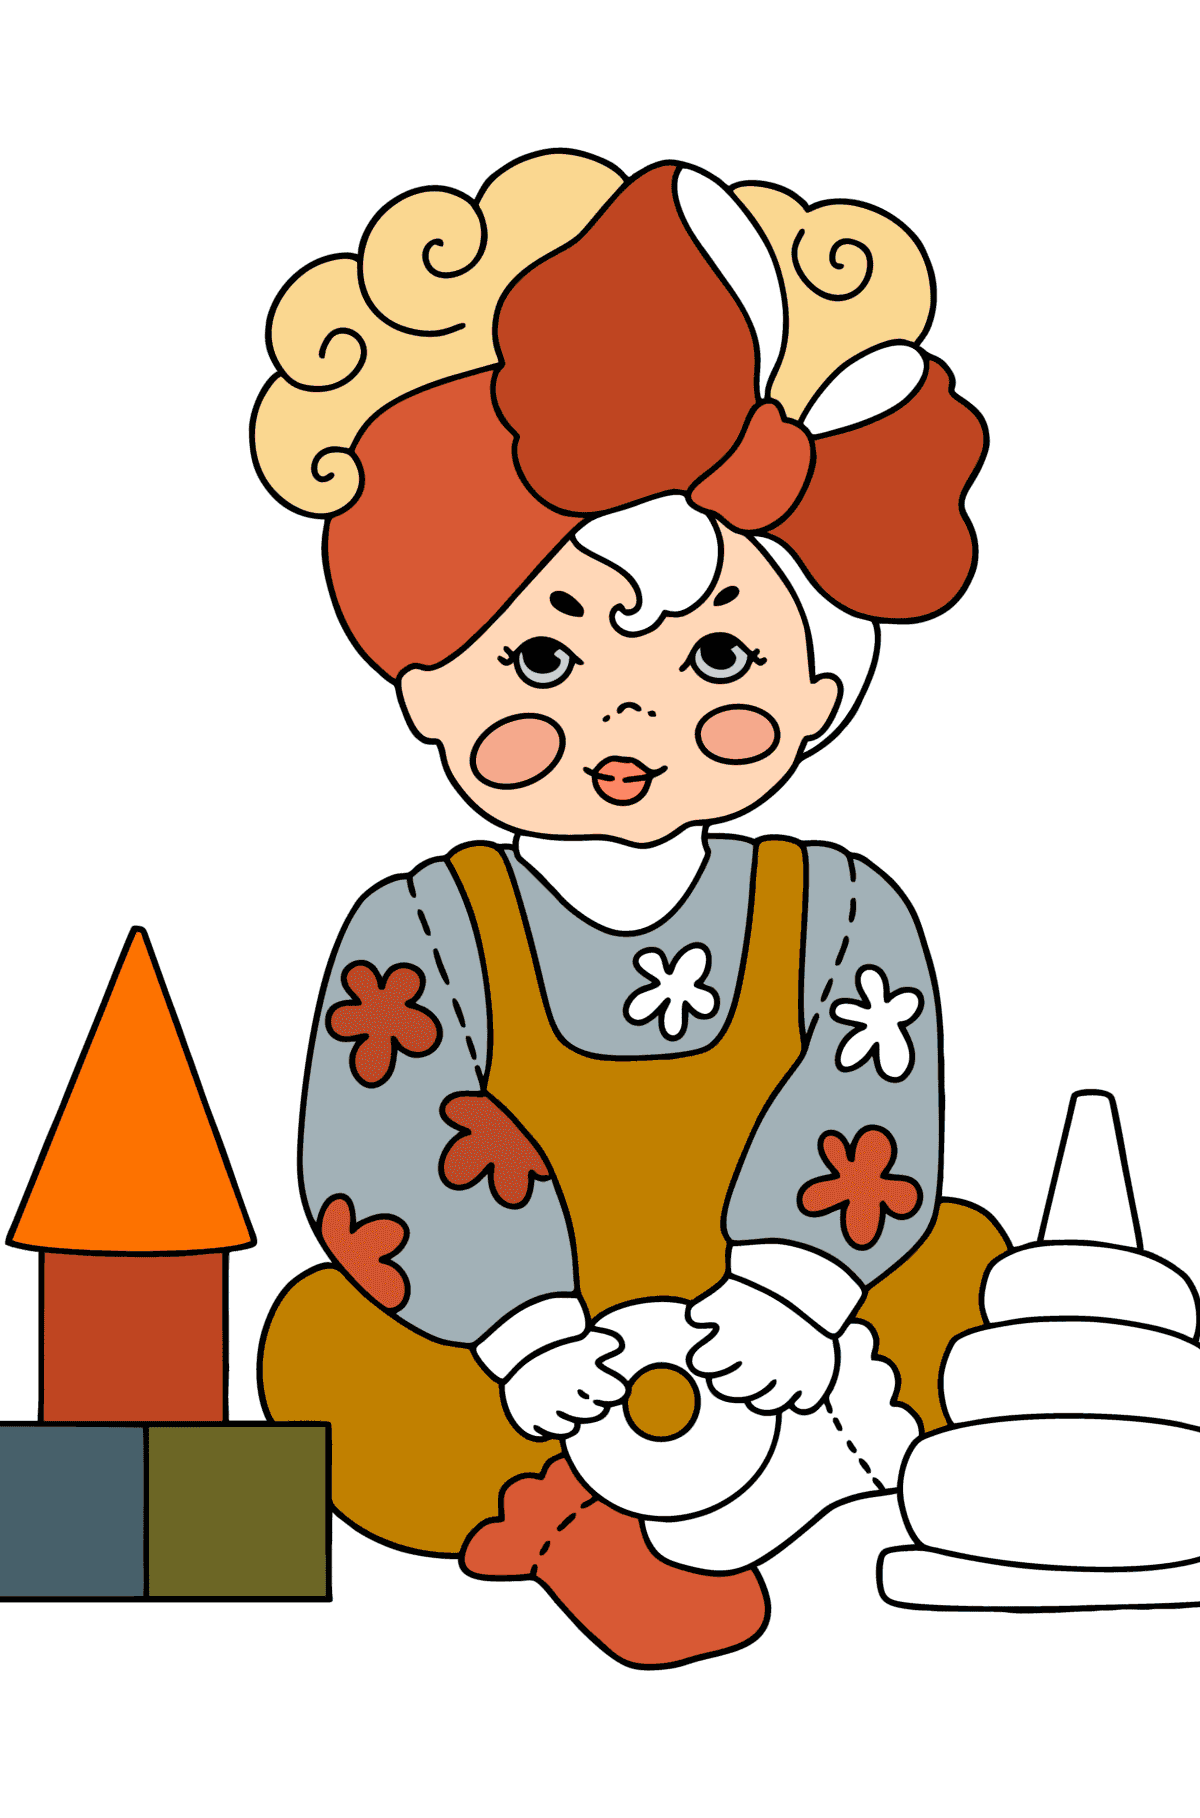 Little girl with a bow сoloring page - Coloring Pages for Kids